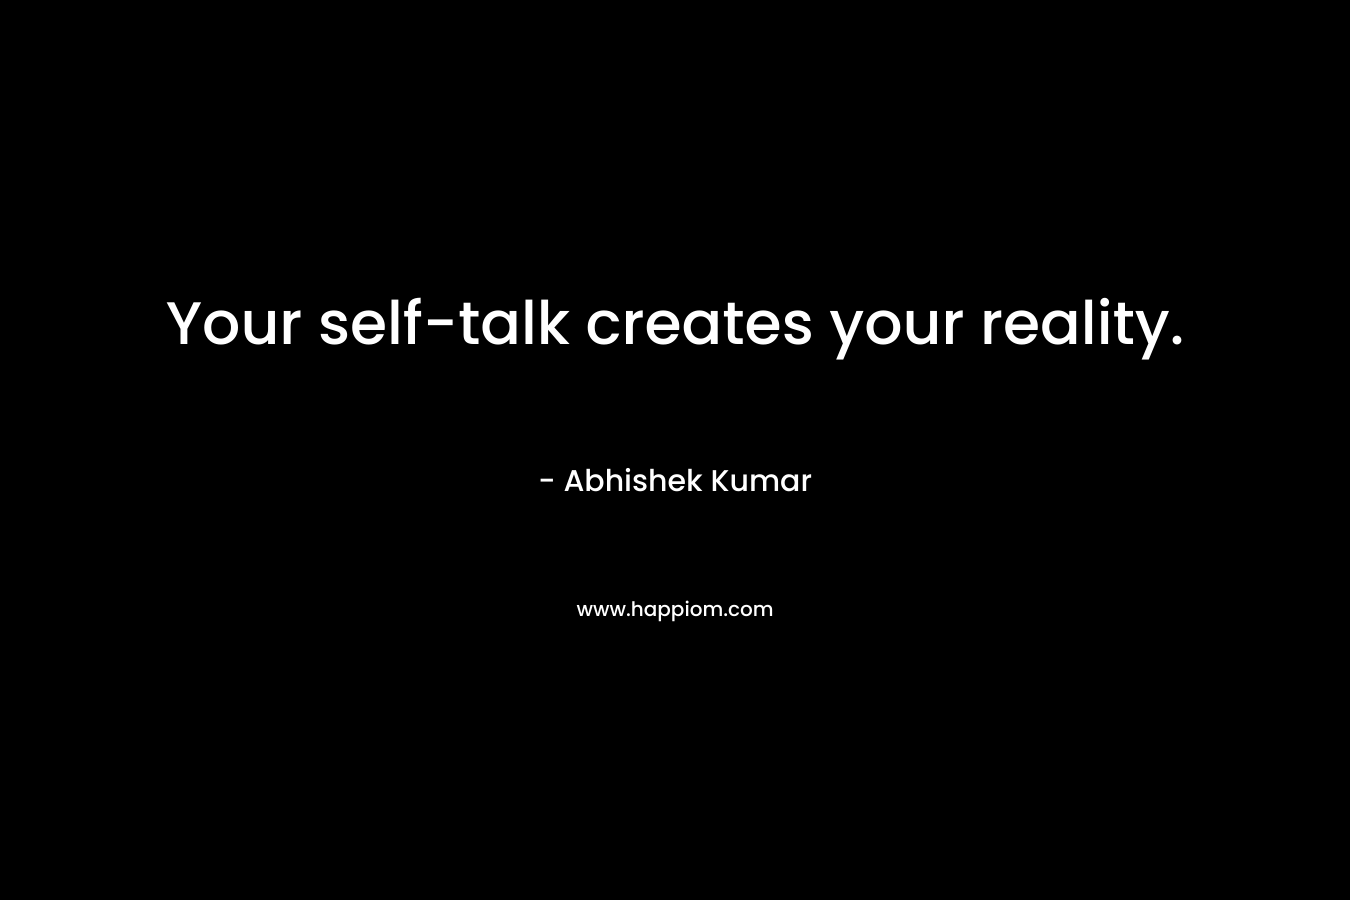 Your self-talk creates your reality.